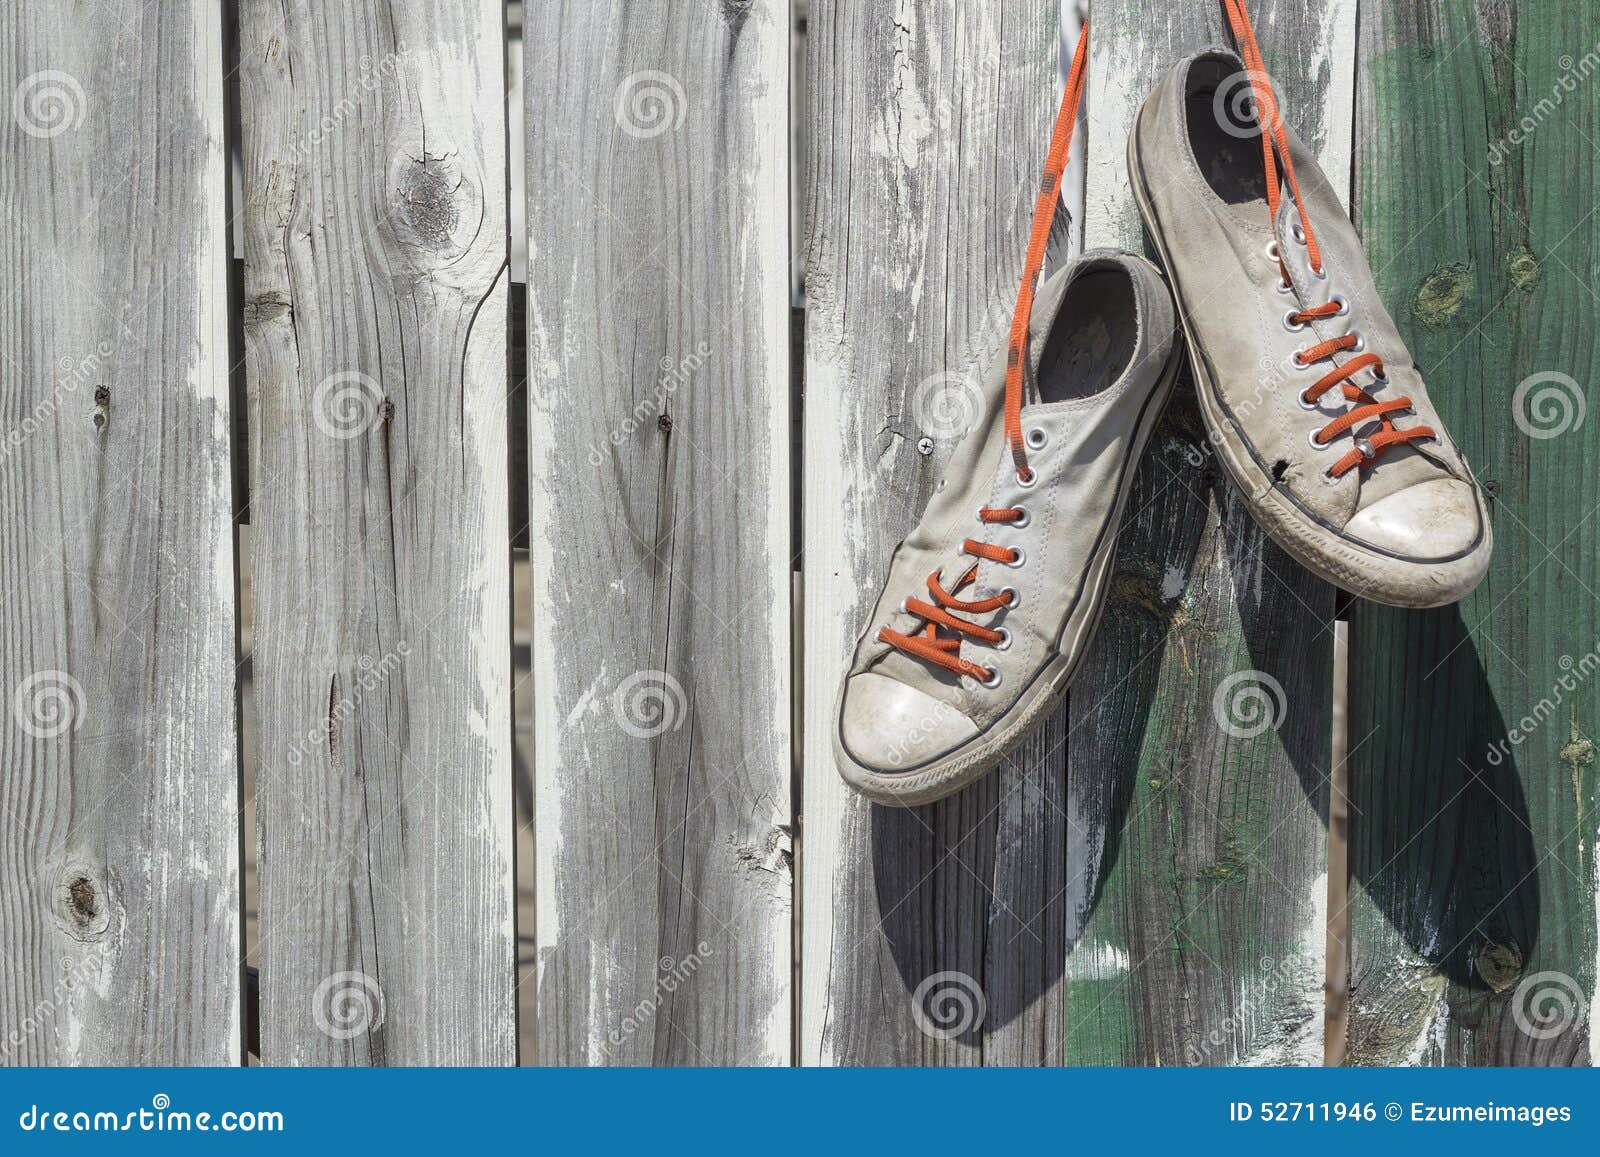 Old Worn Sneakers stock photo. Image of empathy, lace - 52711946